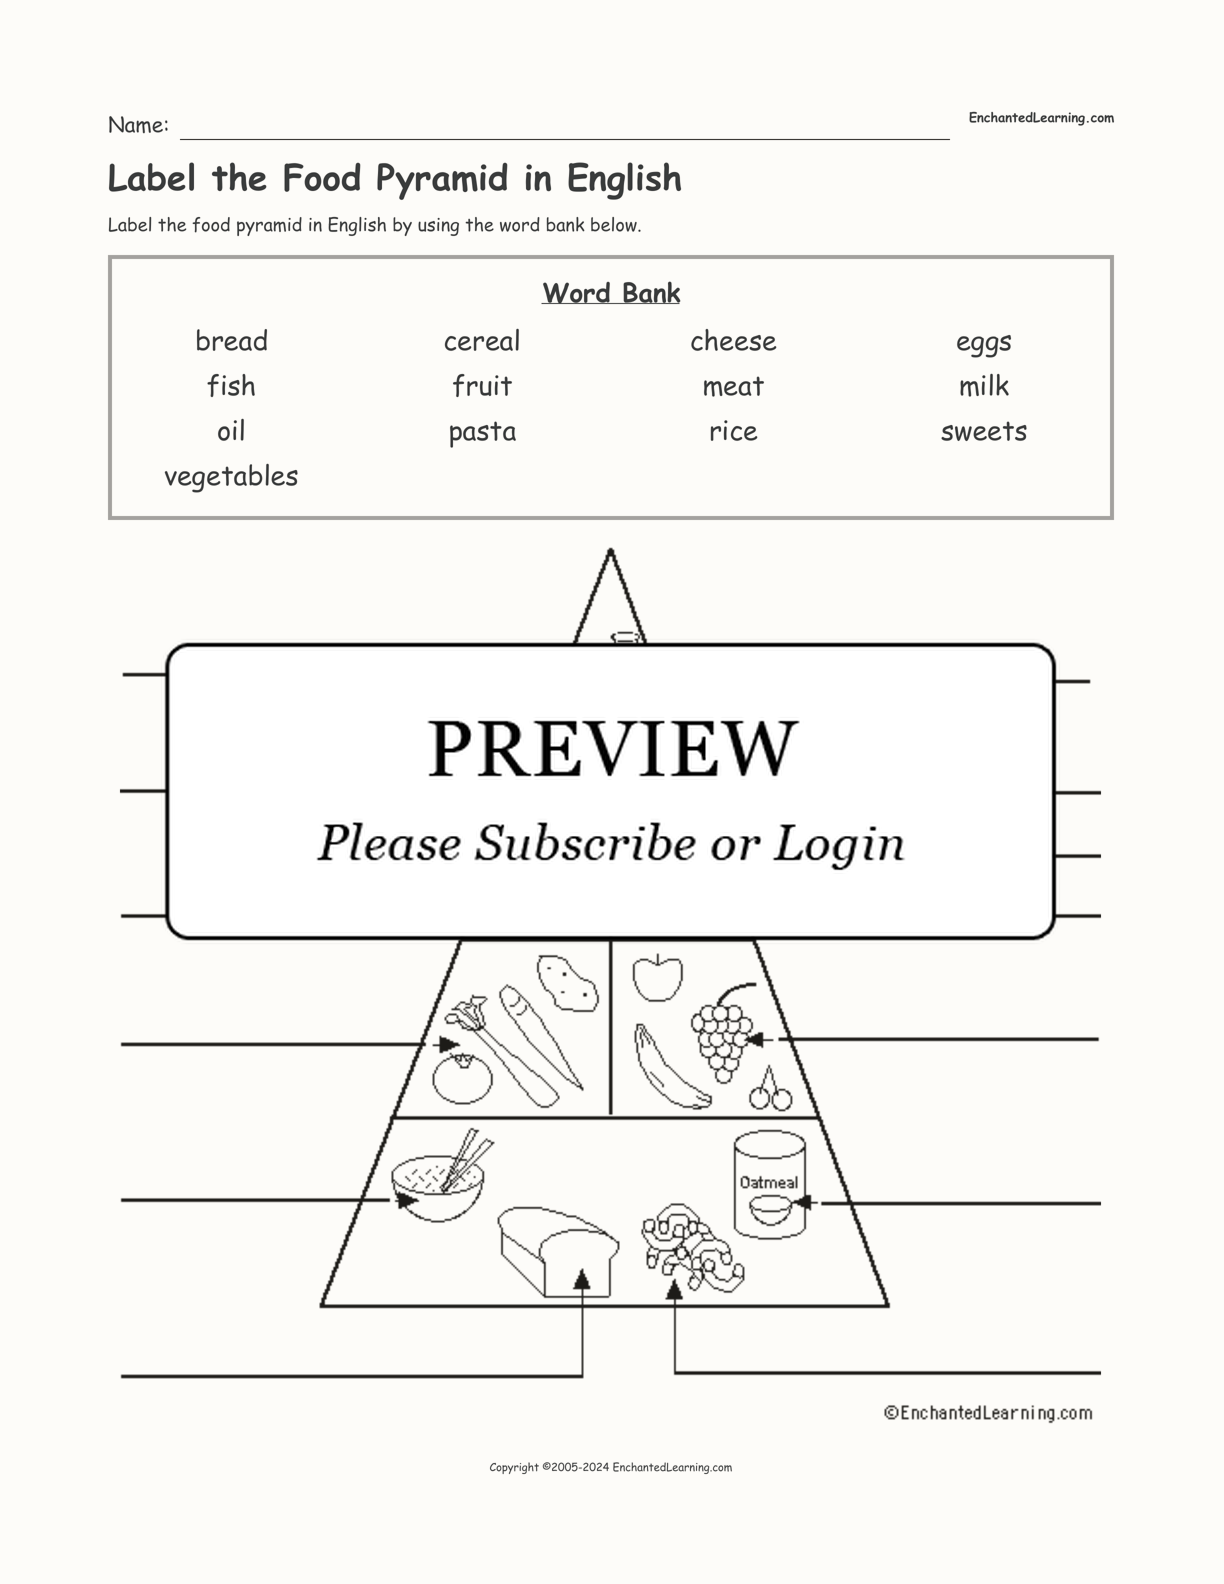 Label the Food Pyramid in English interactive worksheet page 1